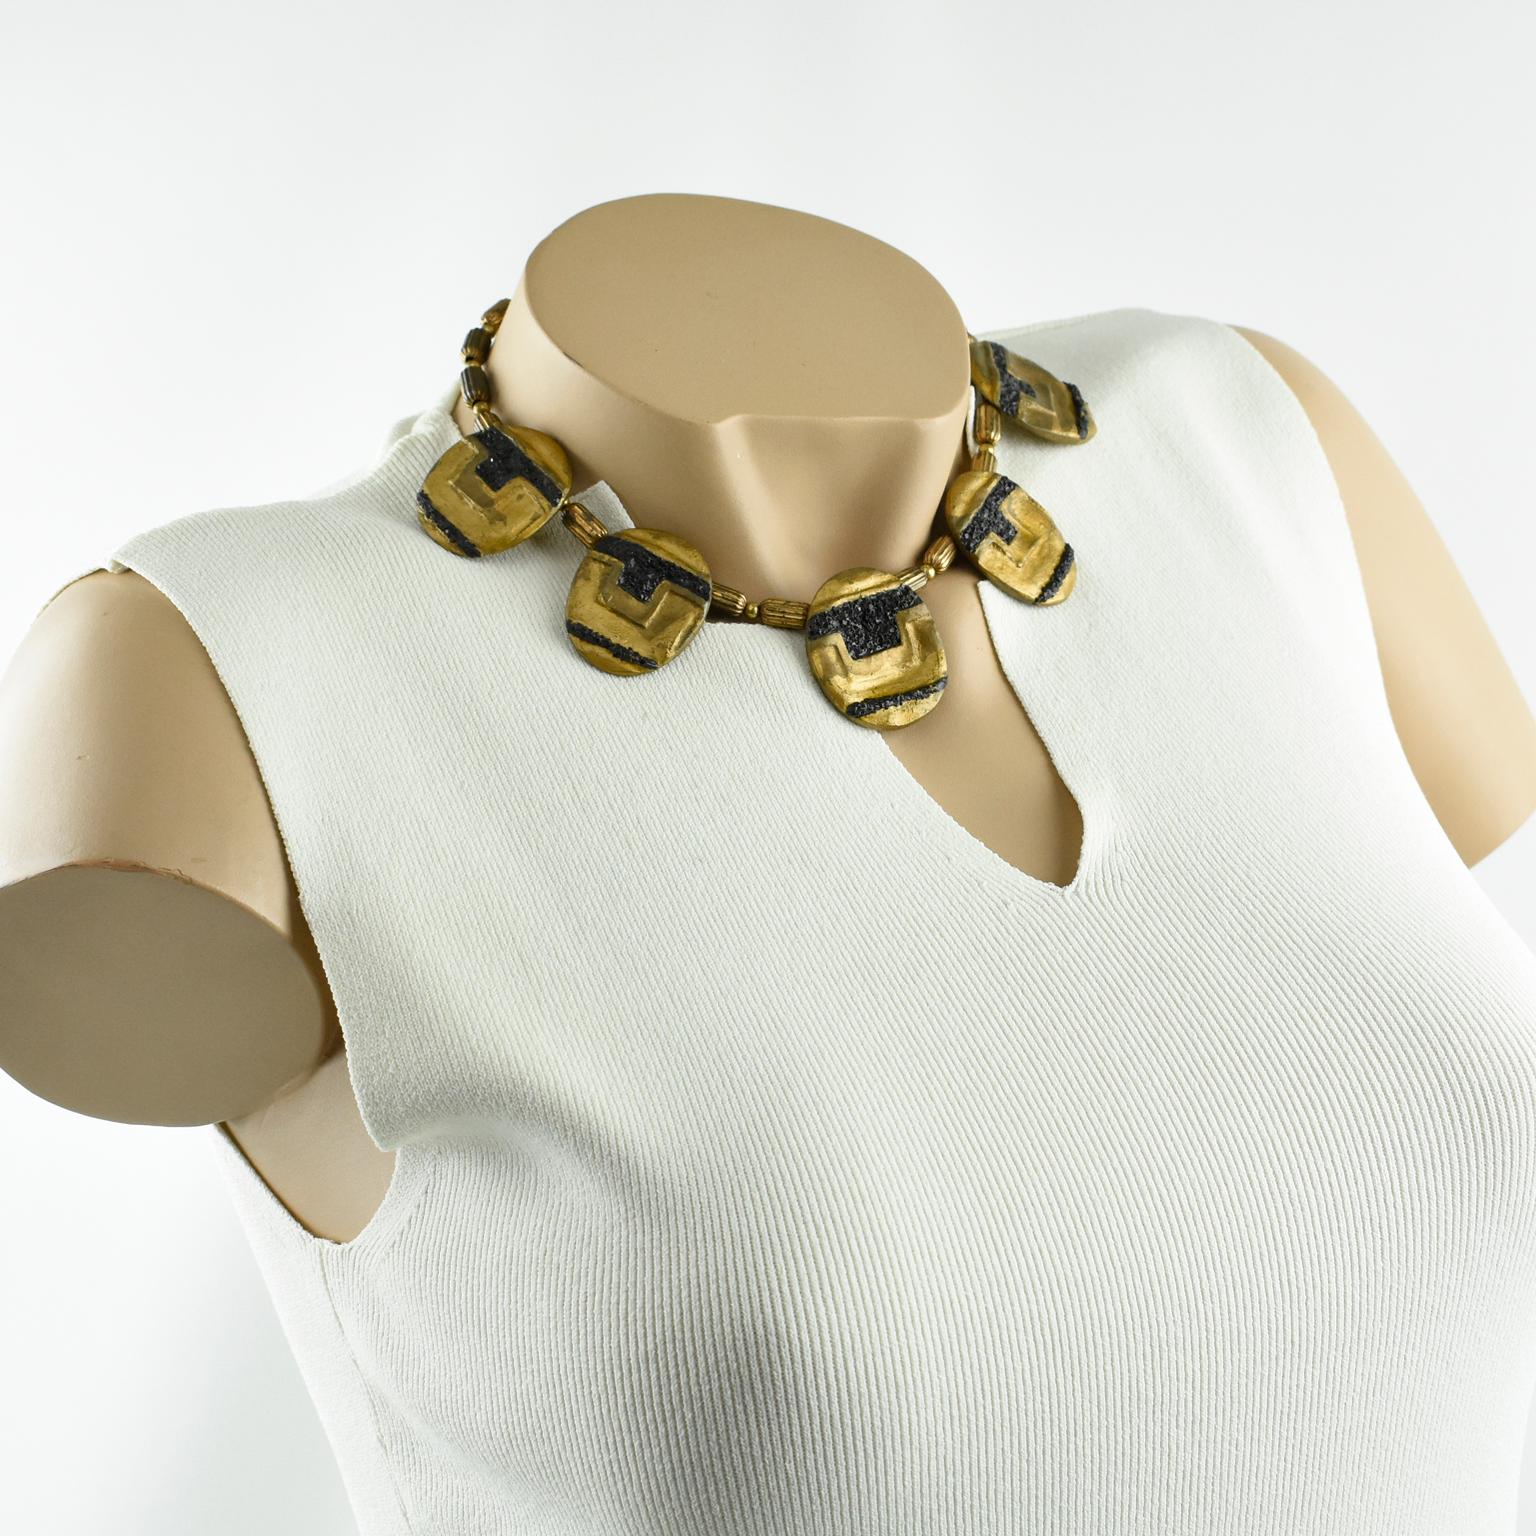 This stunning sculpture choker necklace was designed by American artist Eileen Aubi in 1961. The gilded coating resin pebbles with a hand-made feel are topped with black stone chips and complemented with gilded metal beads. The hand-written